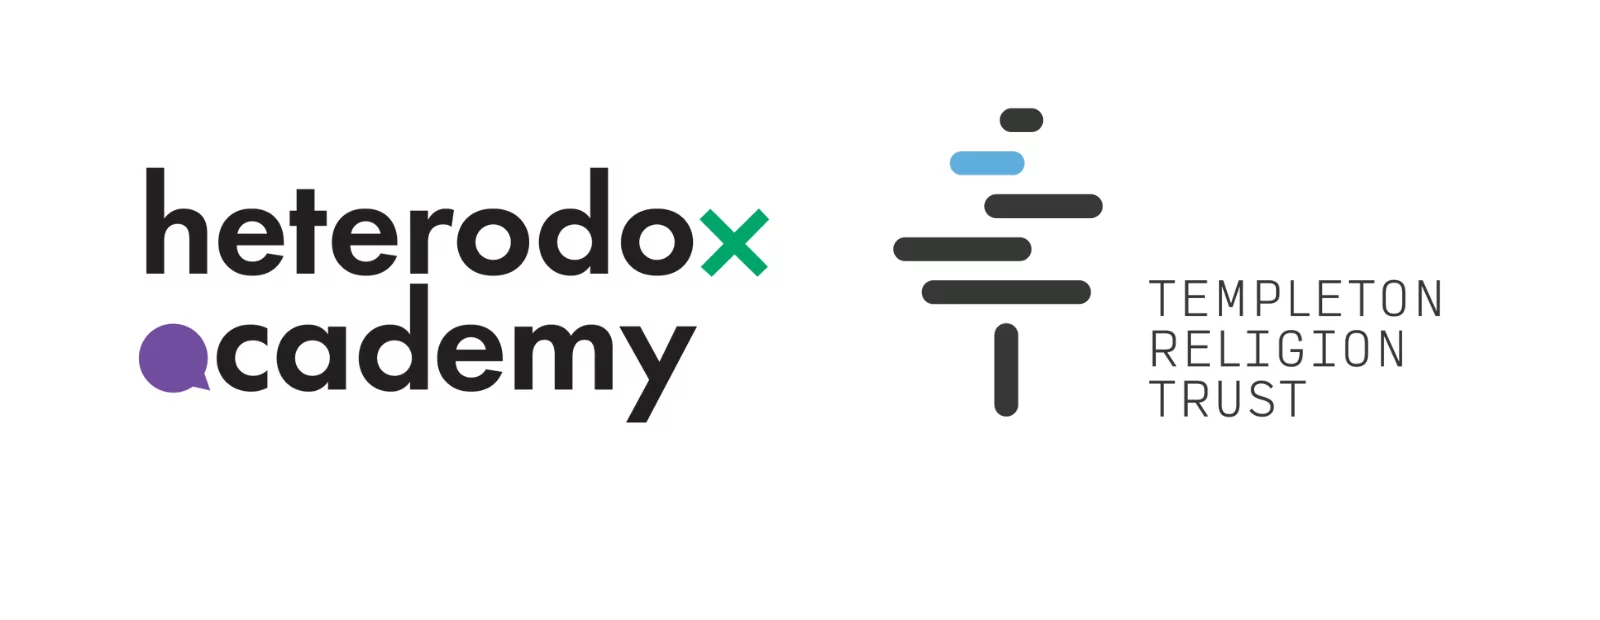 Heterodox Academy Receives Grant to Open Research Center in New York City